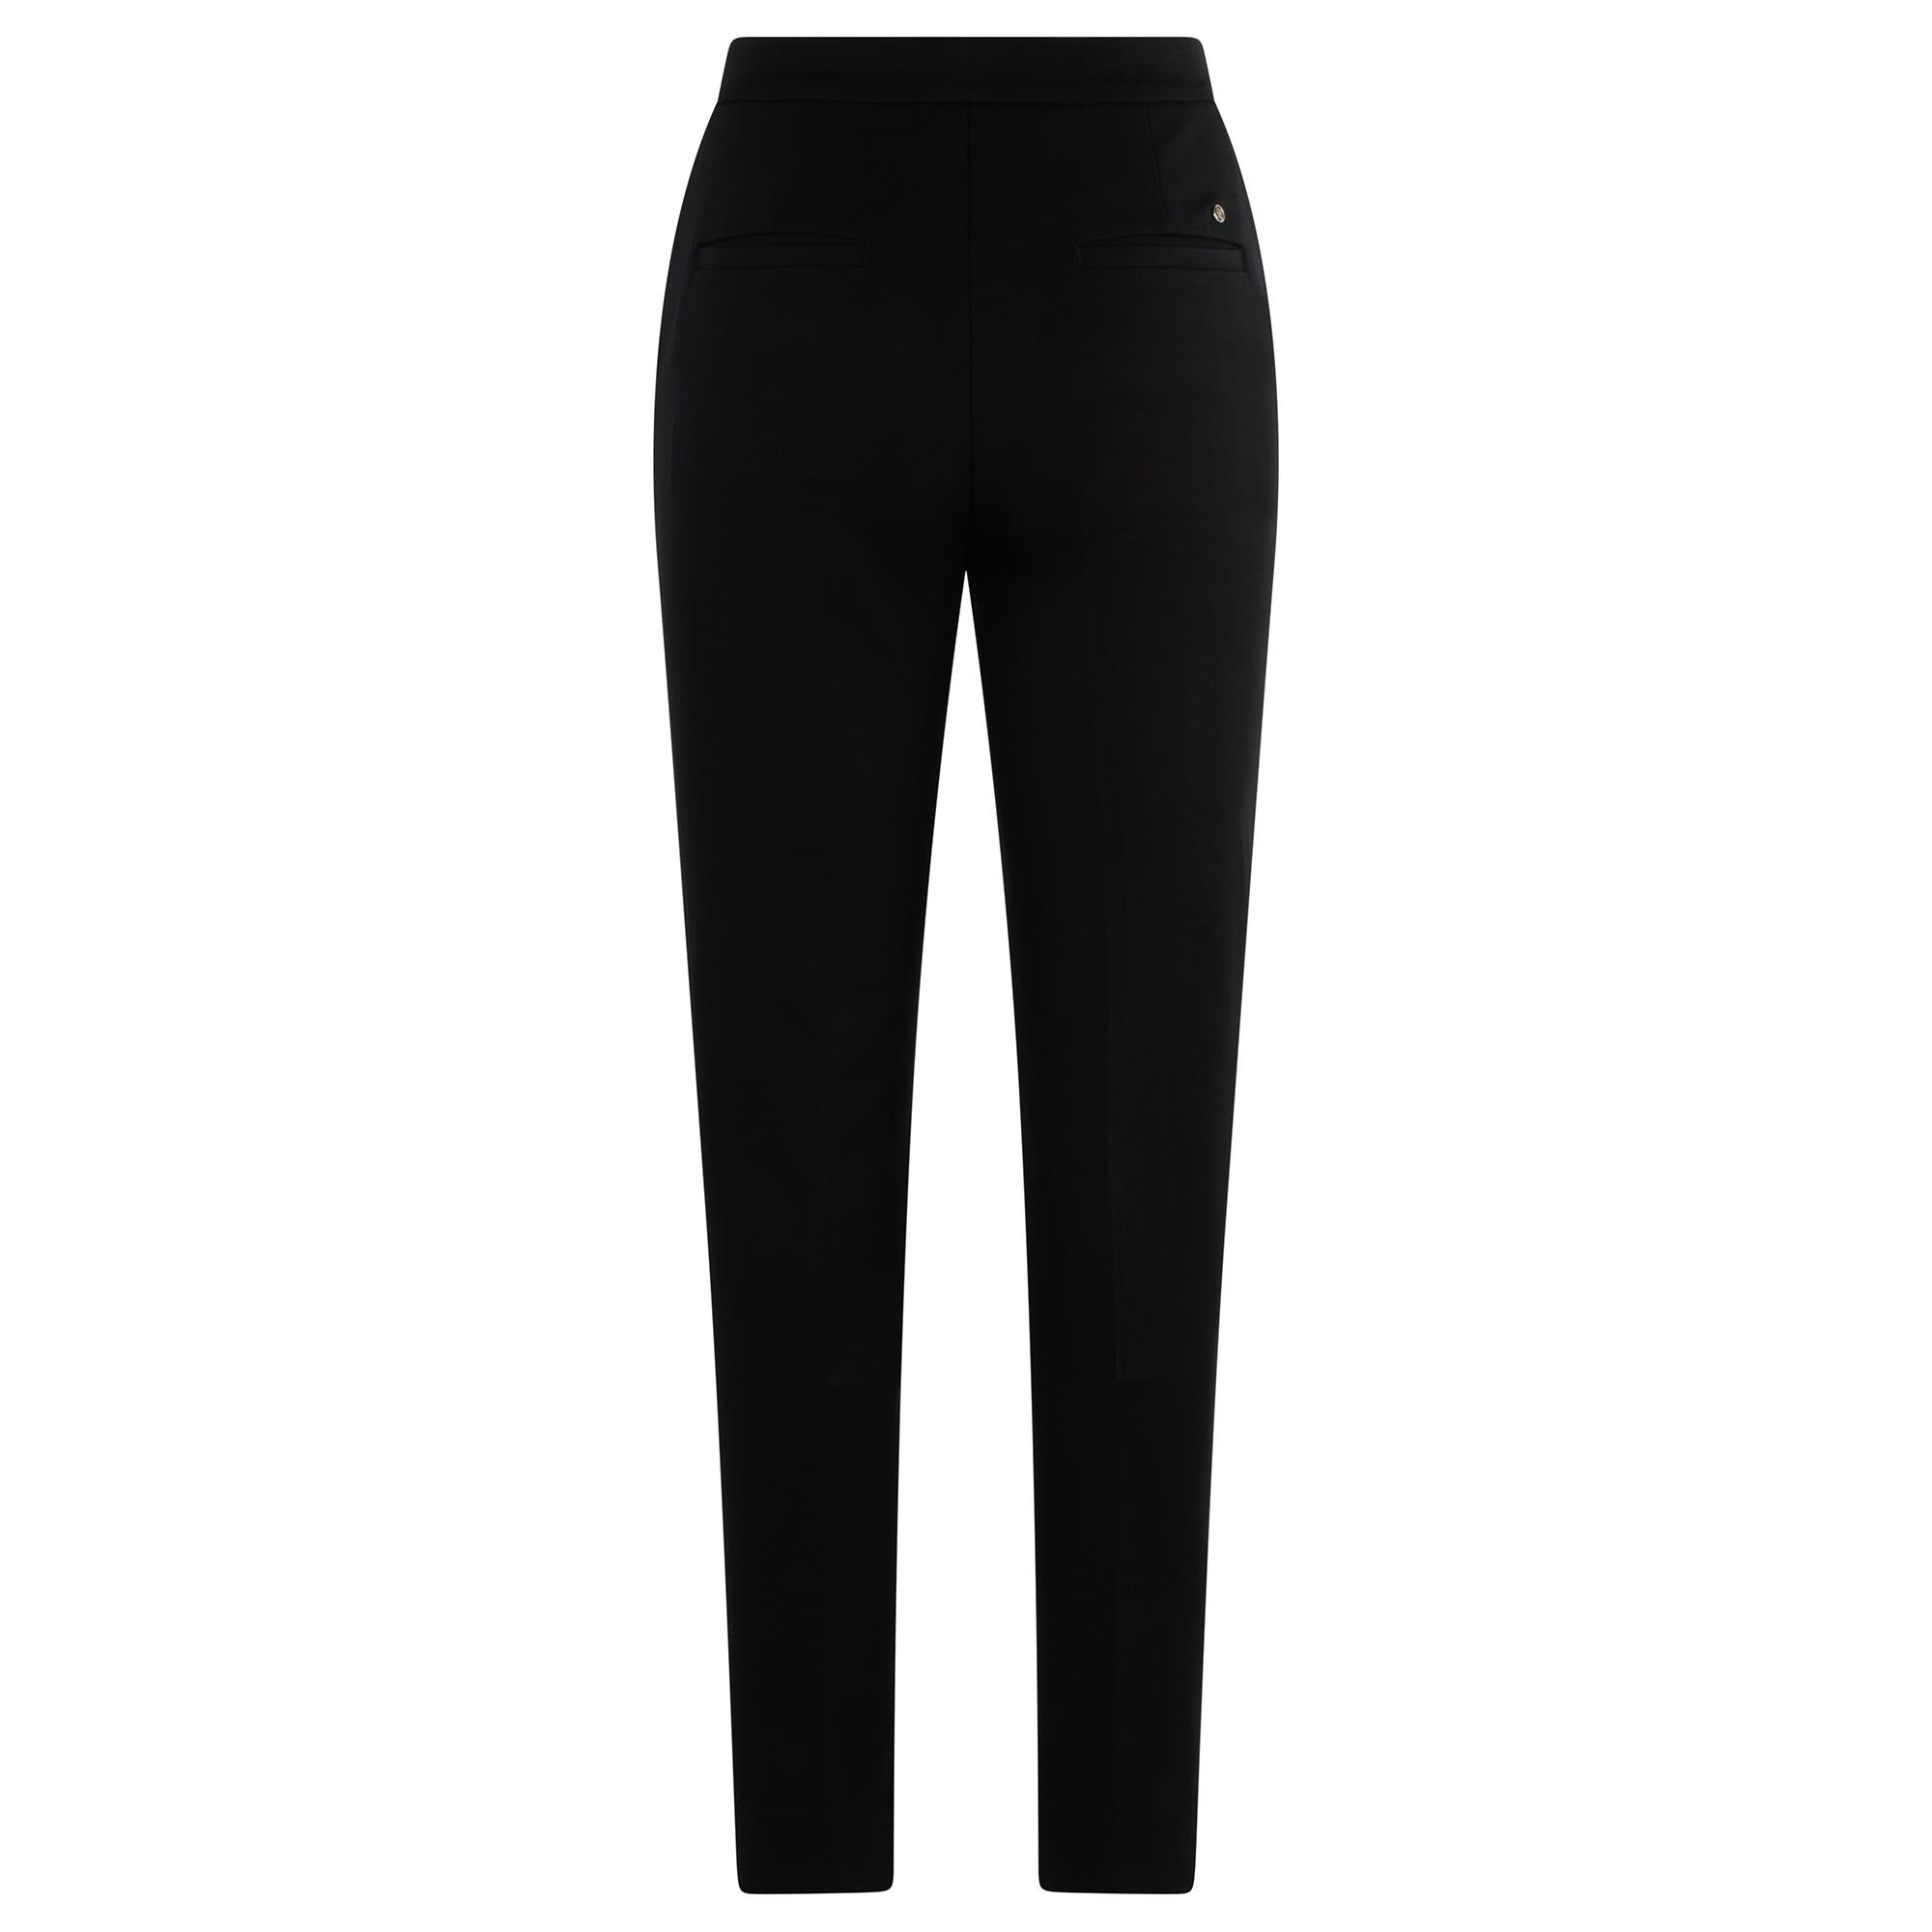 DOUBLE KNIT CIGARETTE LEG HIGH RISE STRETCH TROUSER – G/FORE